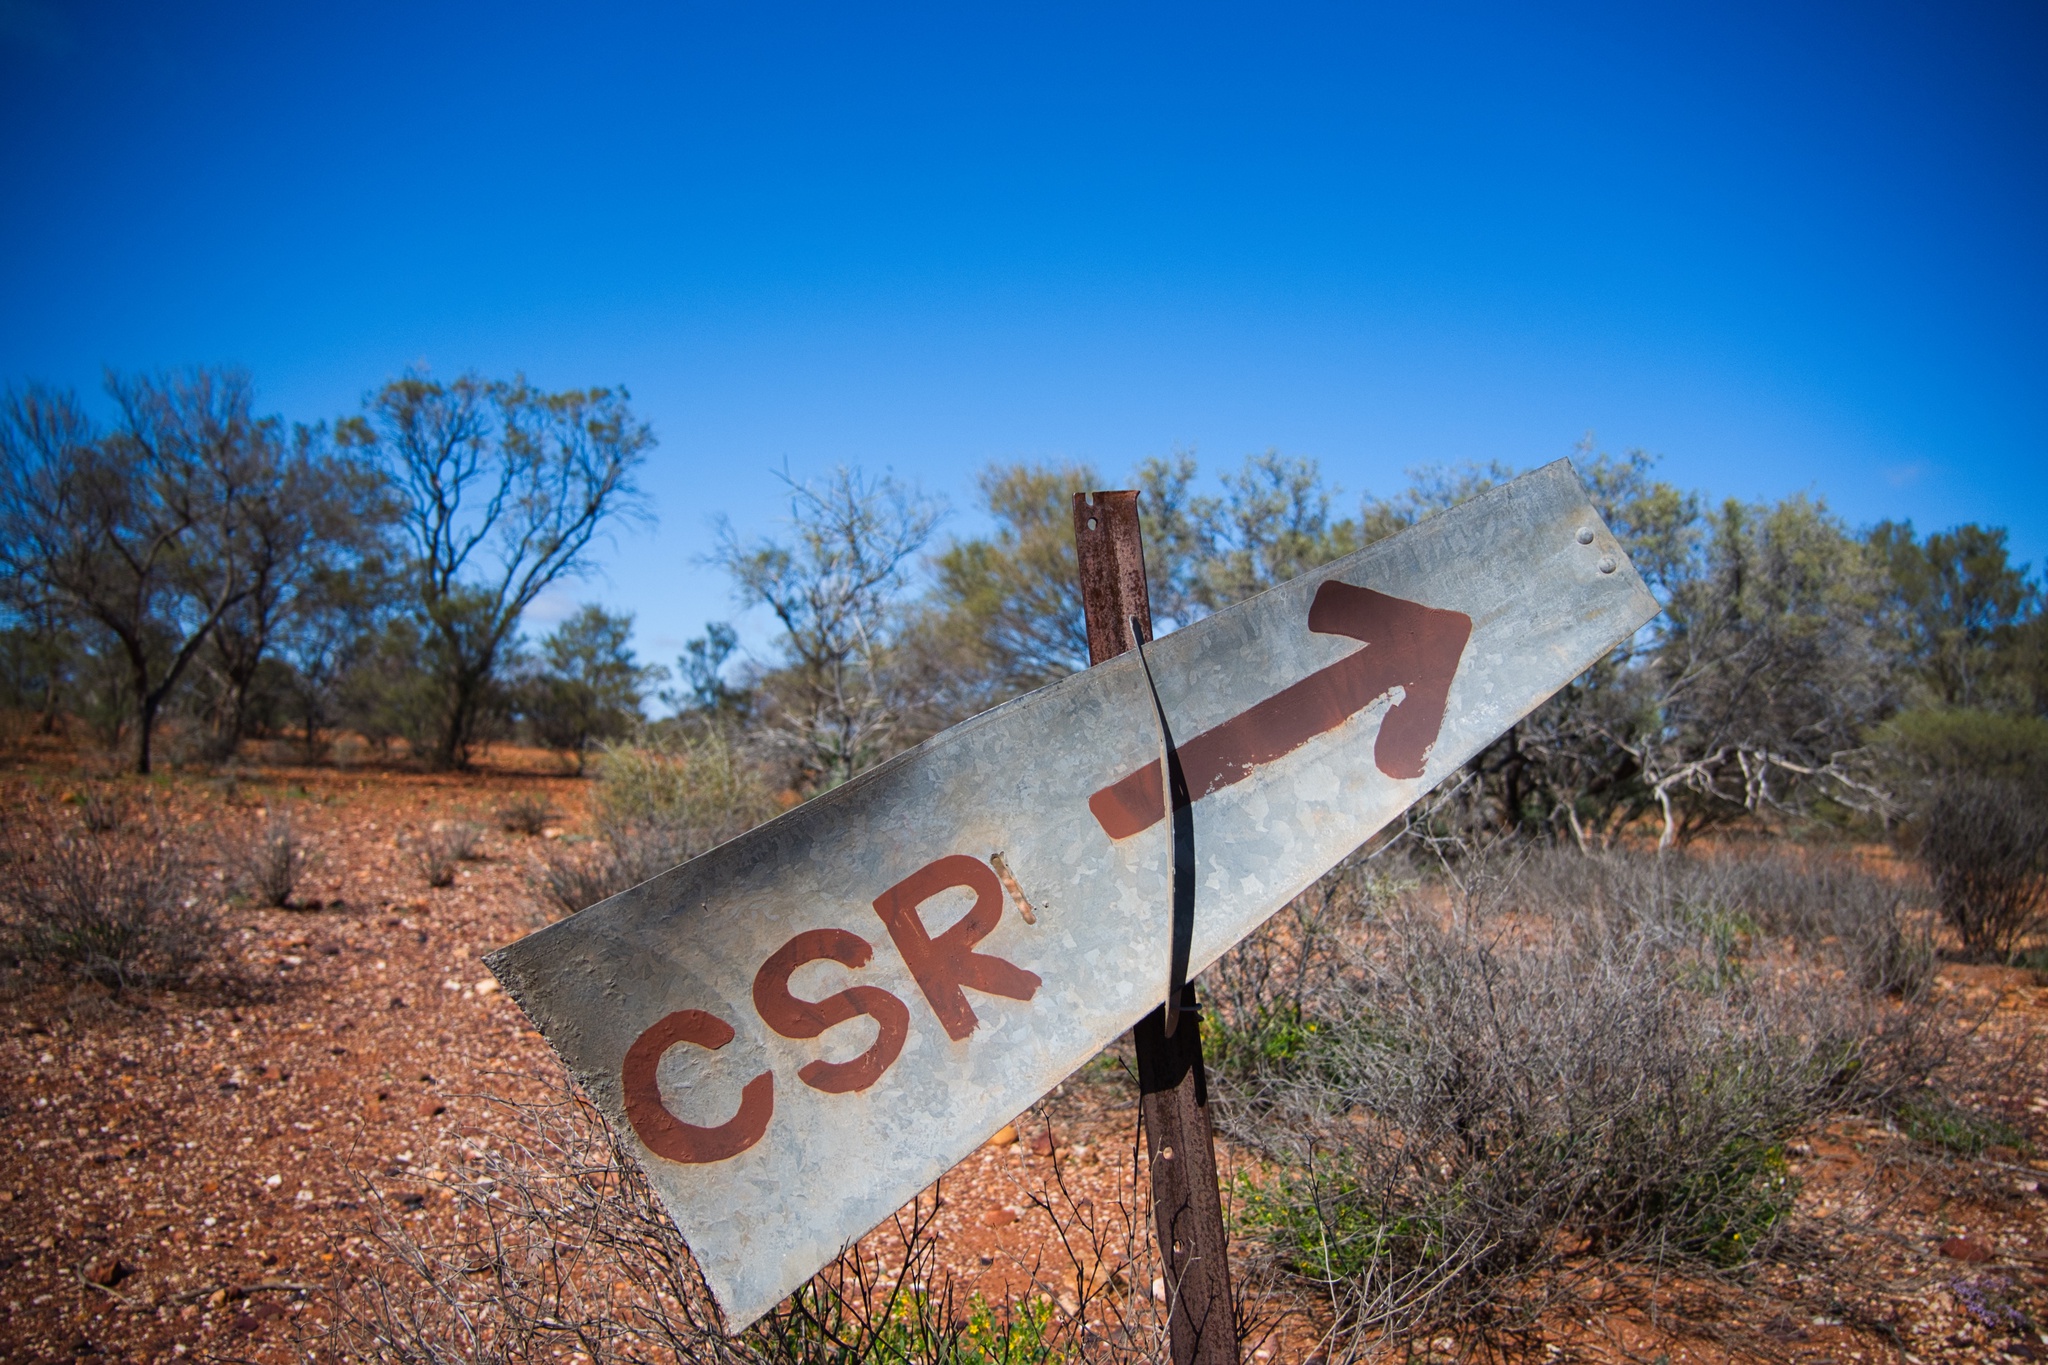 CSR sign pointing towards the sky